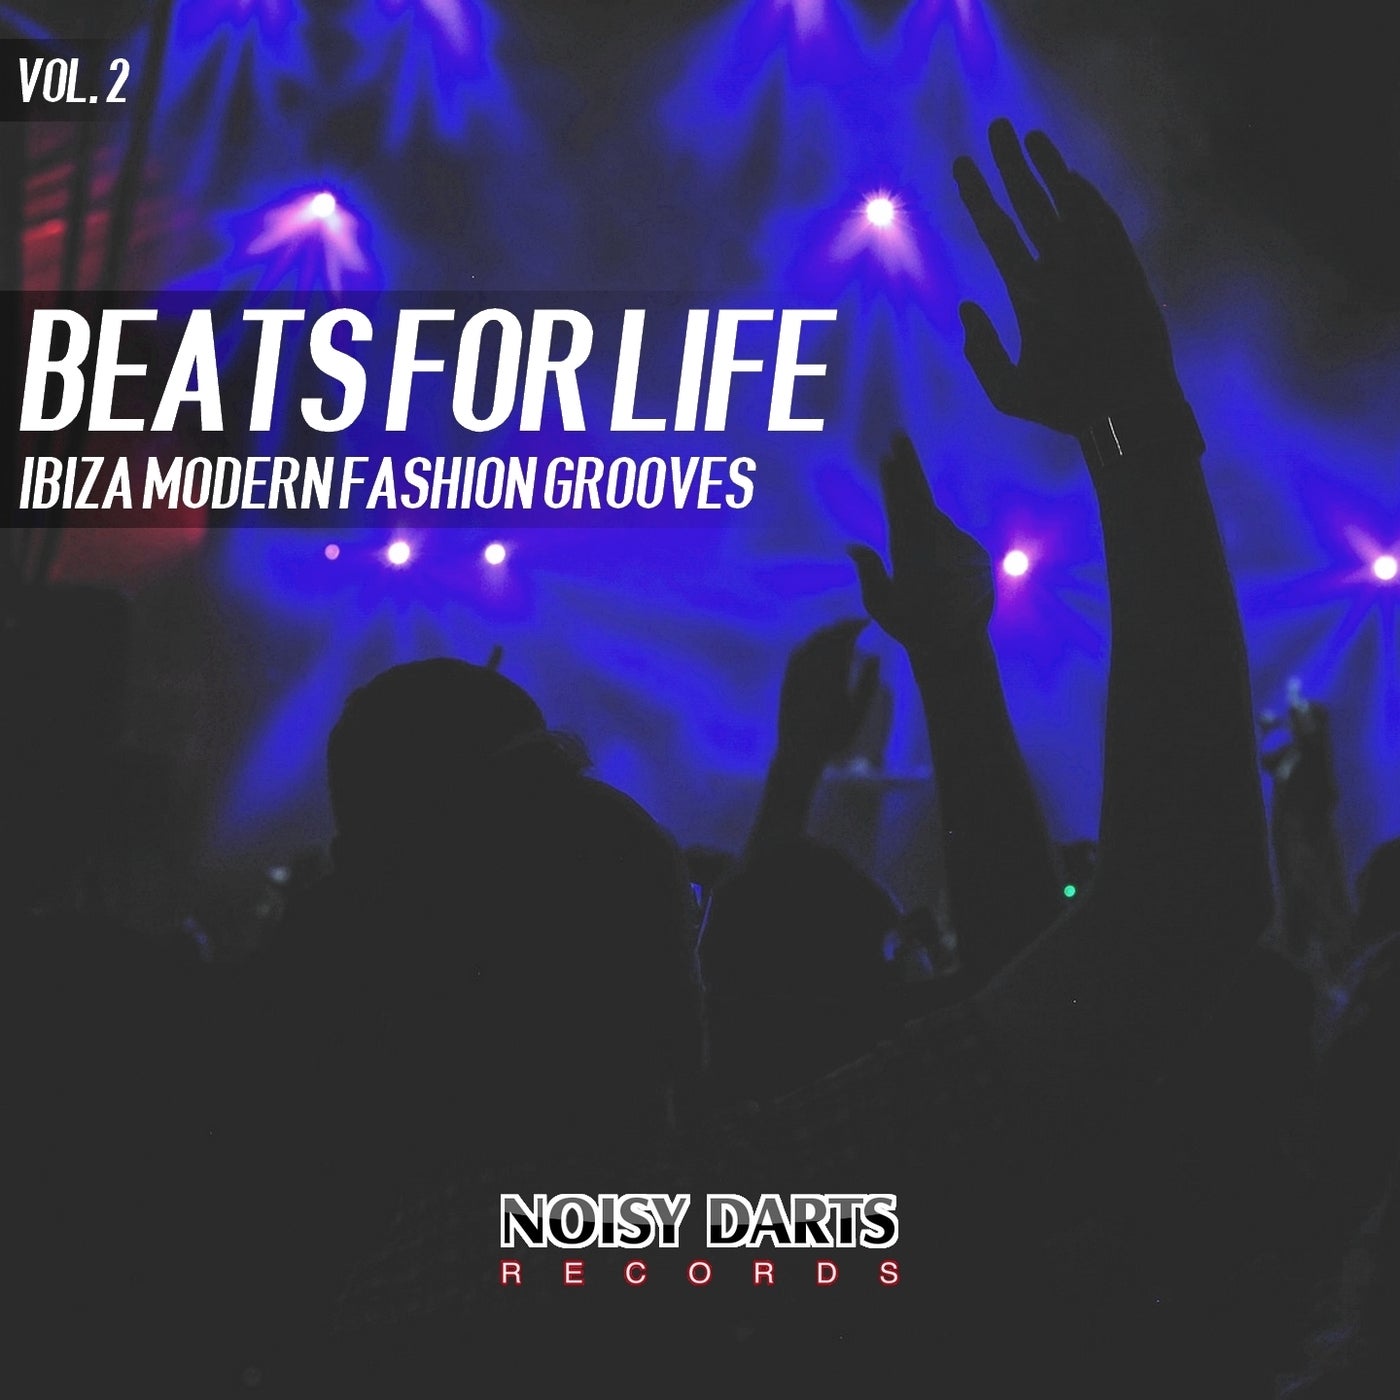 Beats for Life, Vol 2 (Ibiza Modern Fashion Grooves)